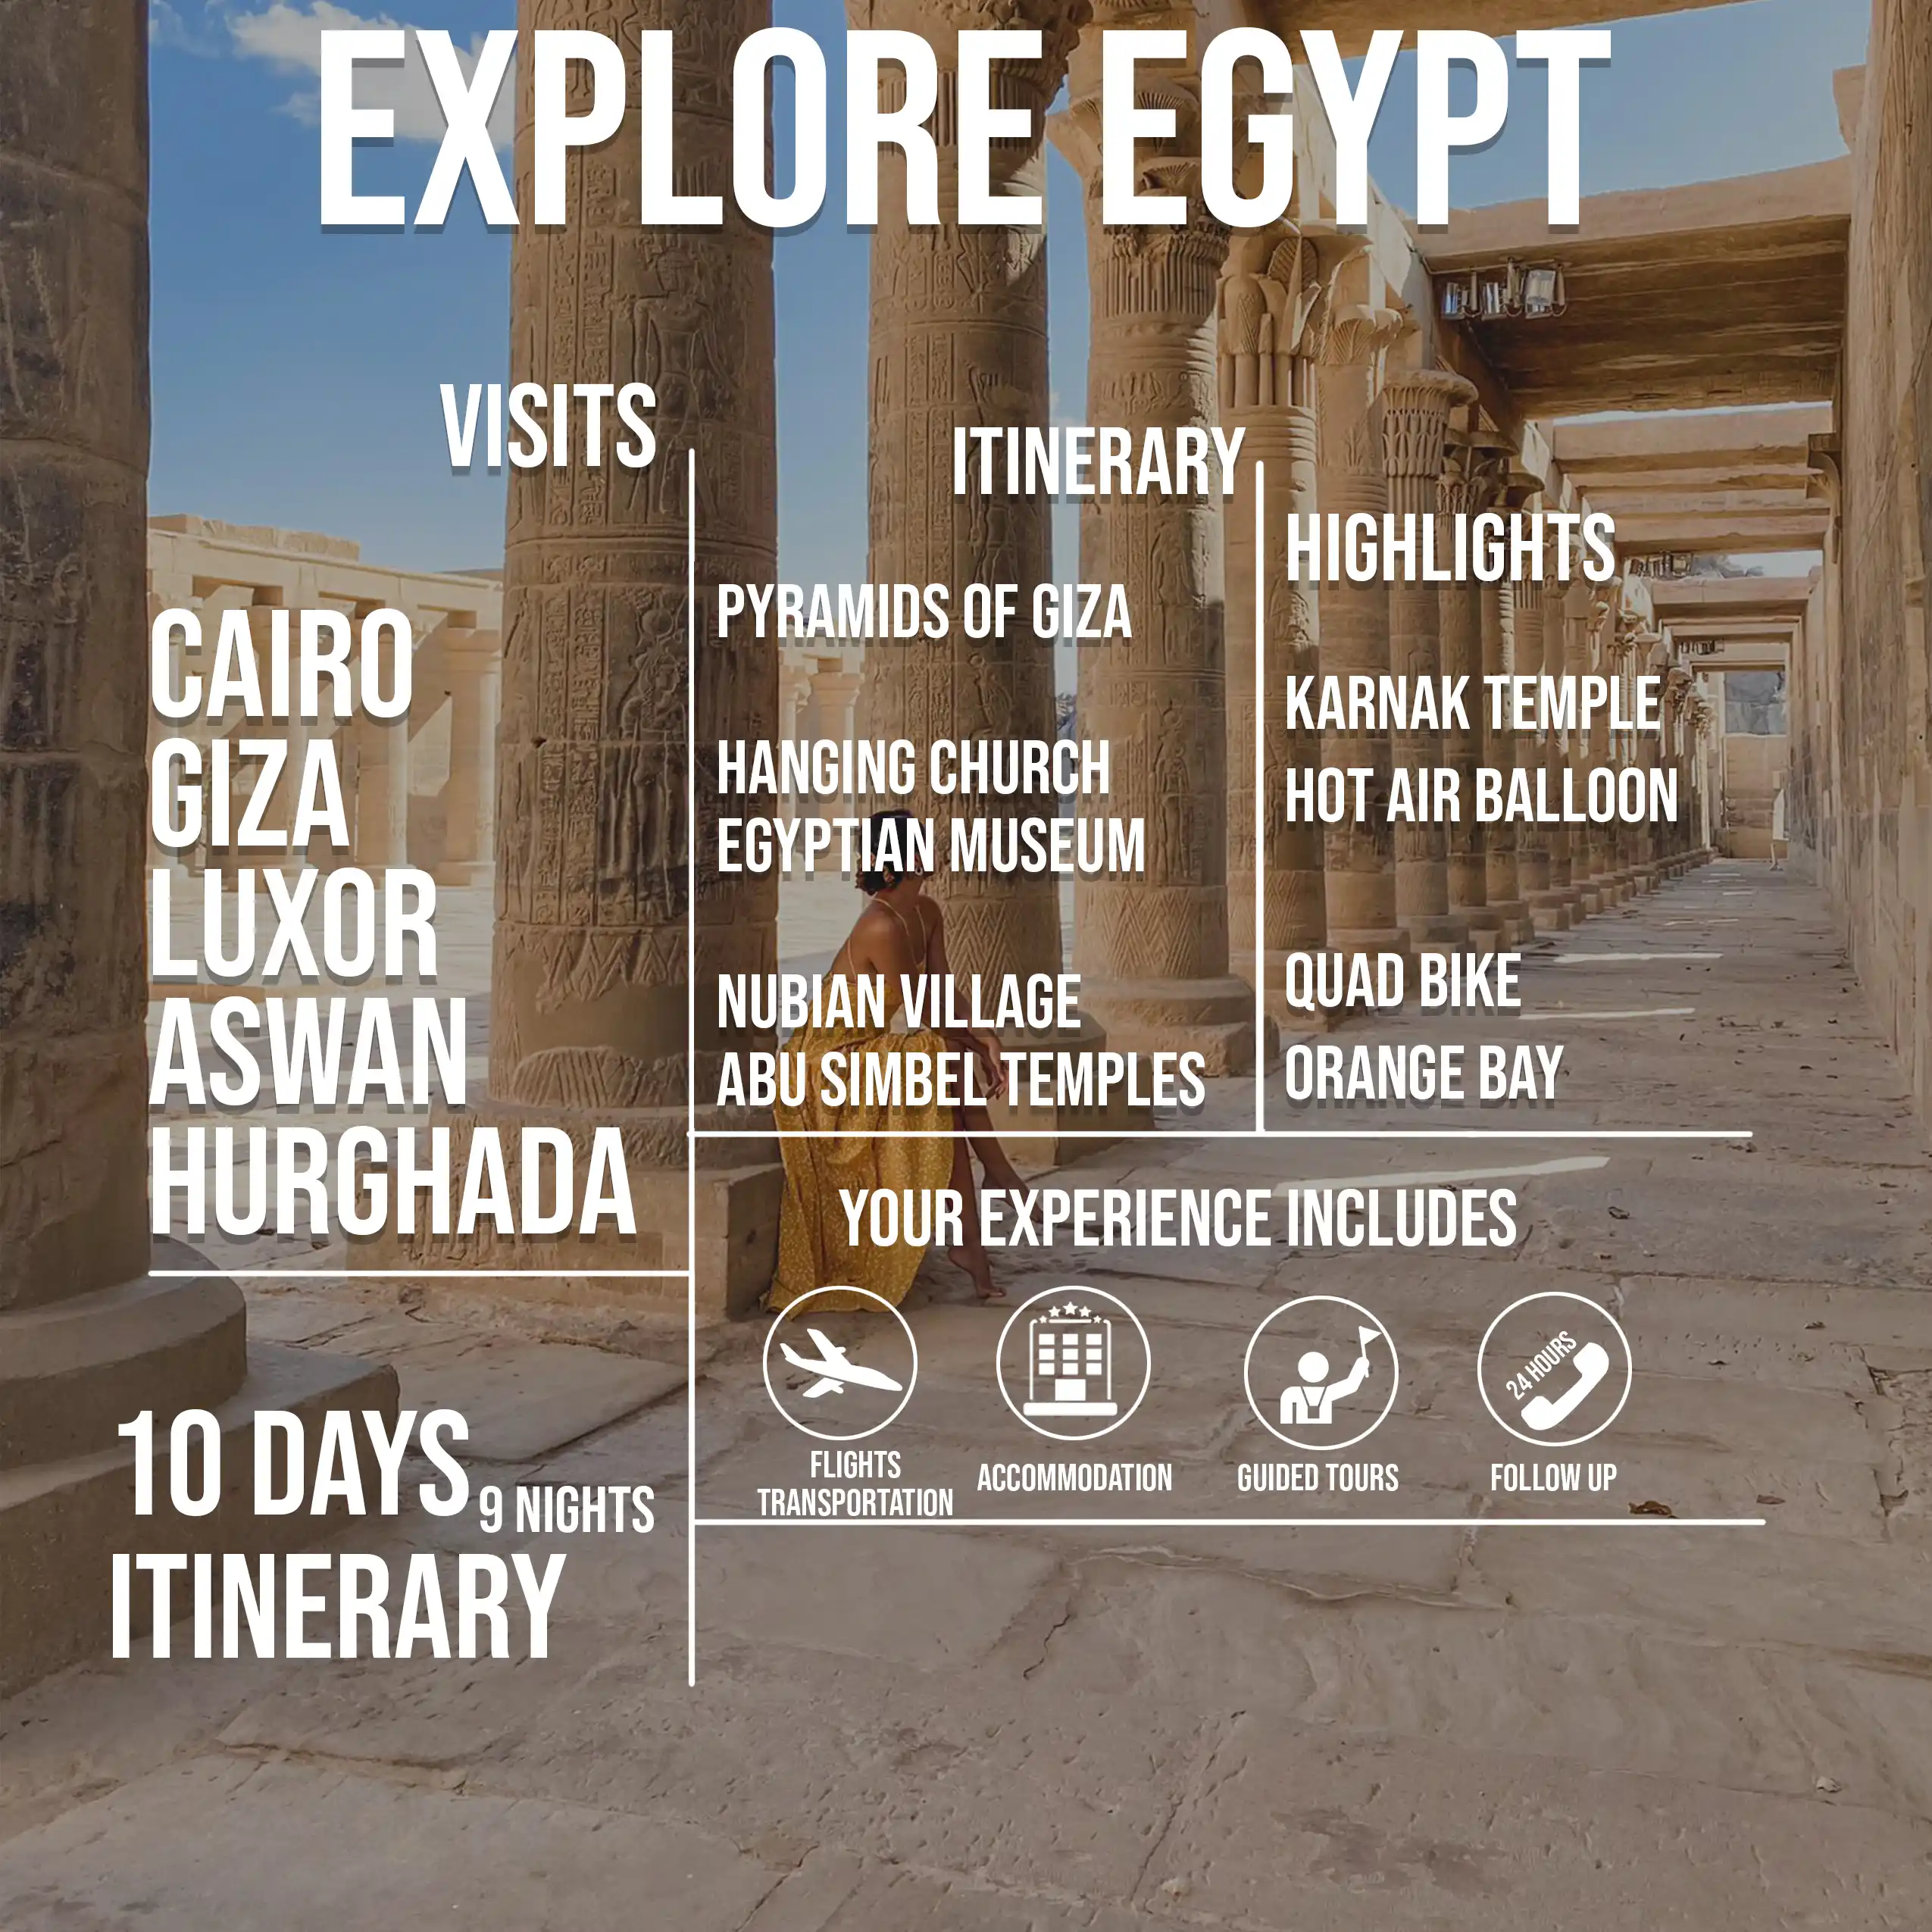 10-day iEgypt trip to discover Egypt Hurghada, Aswan, Luxor, and Cairo